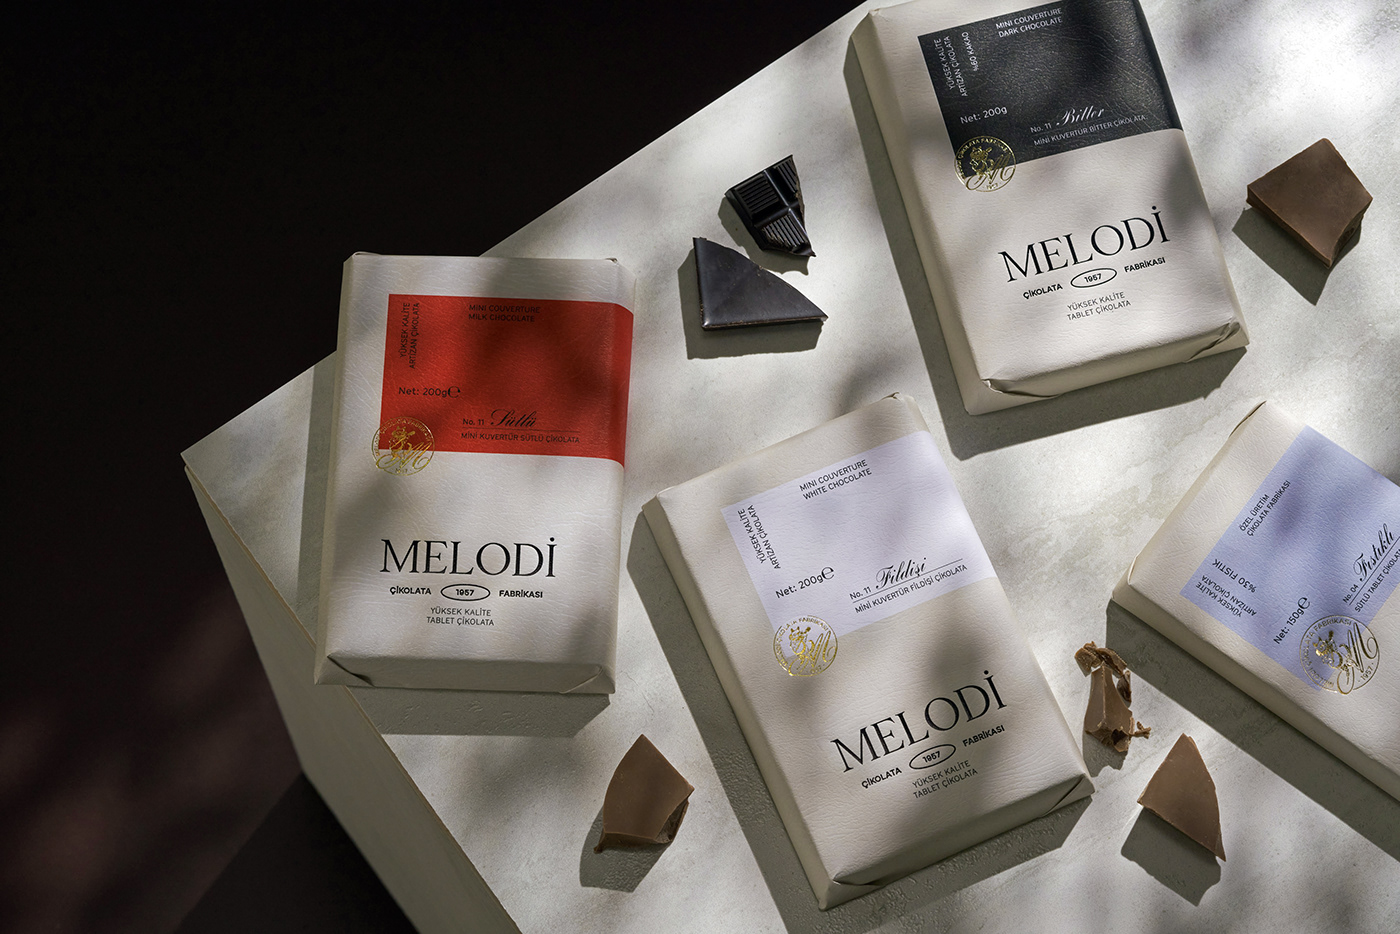 MELODİ 1957 chocolate packaging designed by a group of three